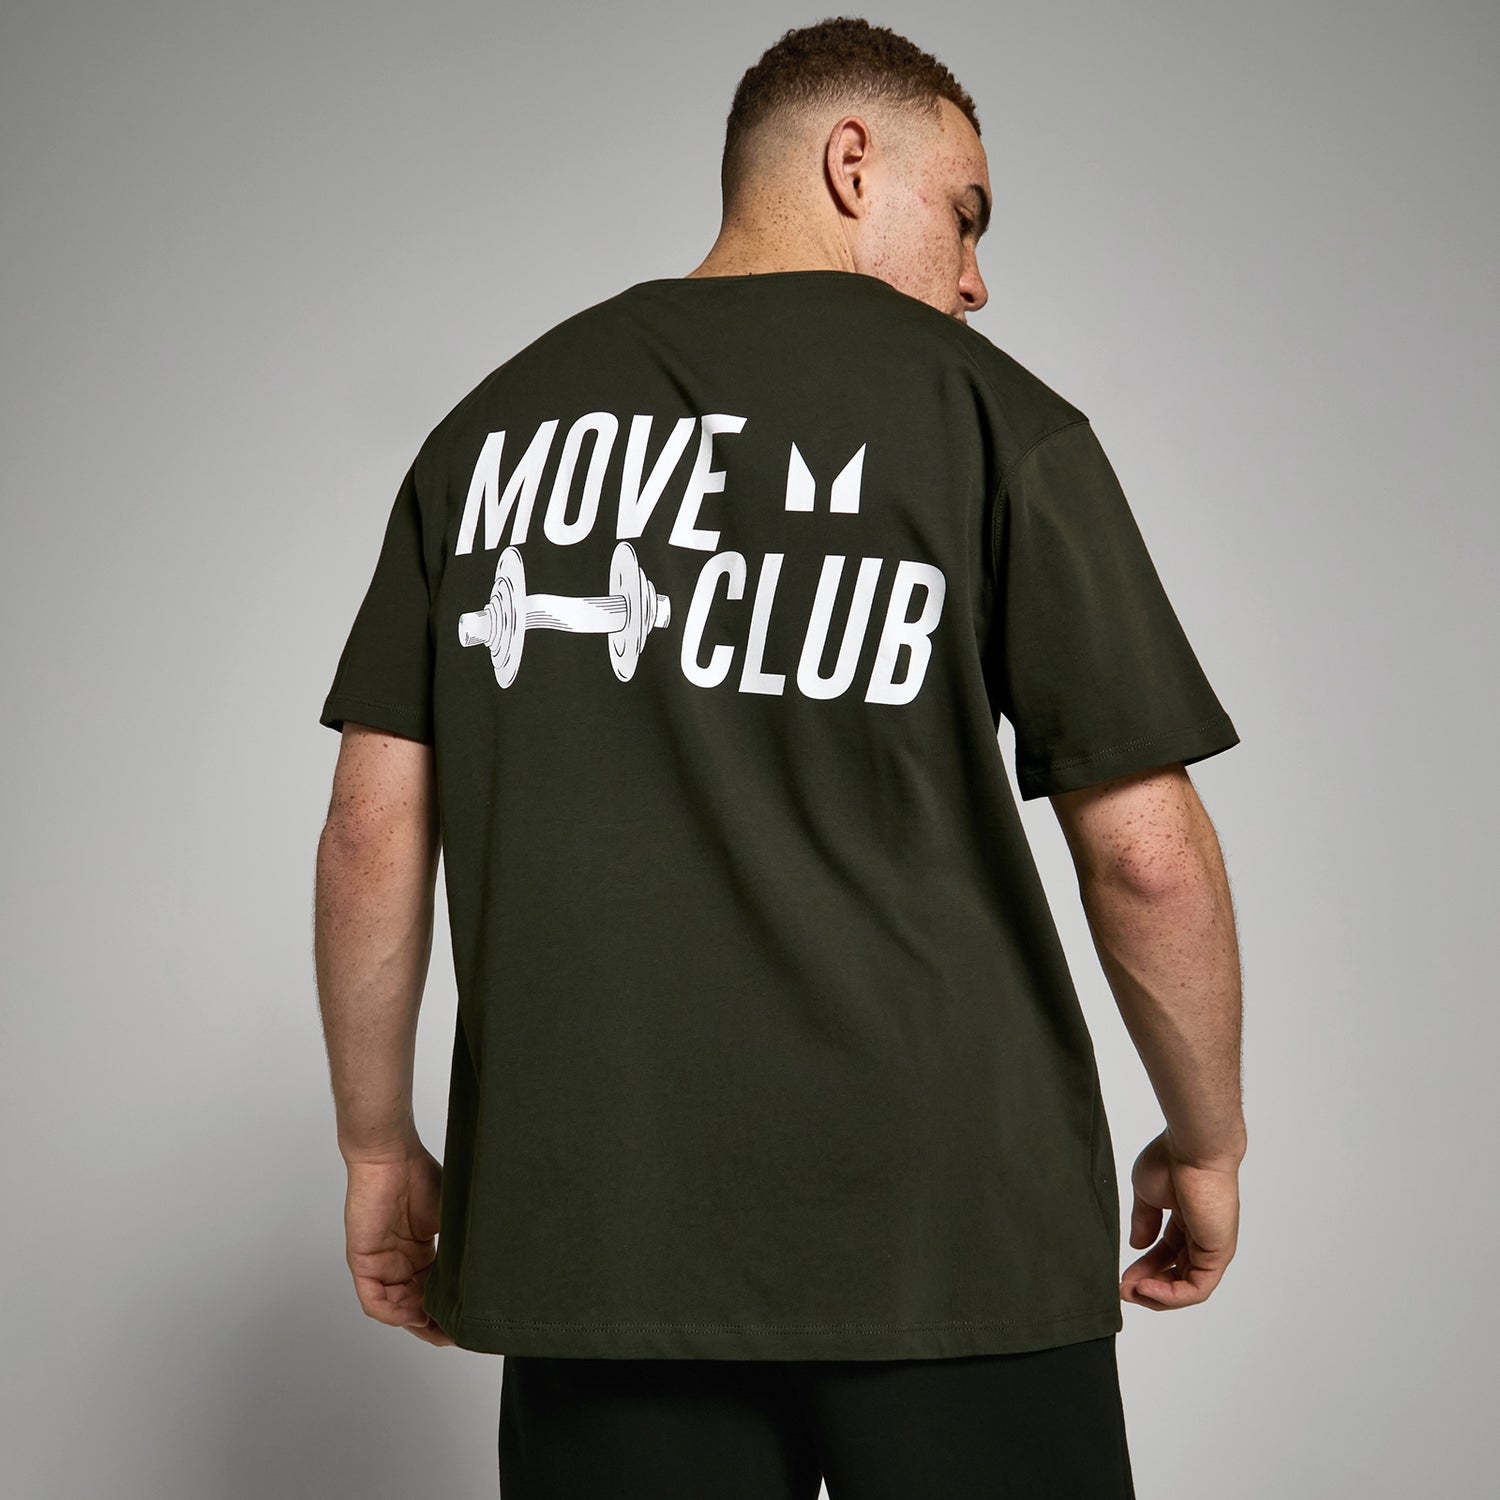 MP Oversized Move Club T-Shirt – Forest Green